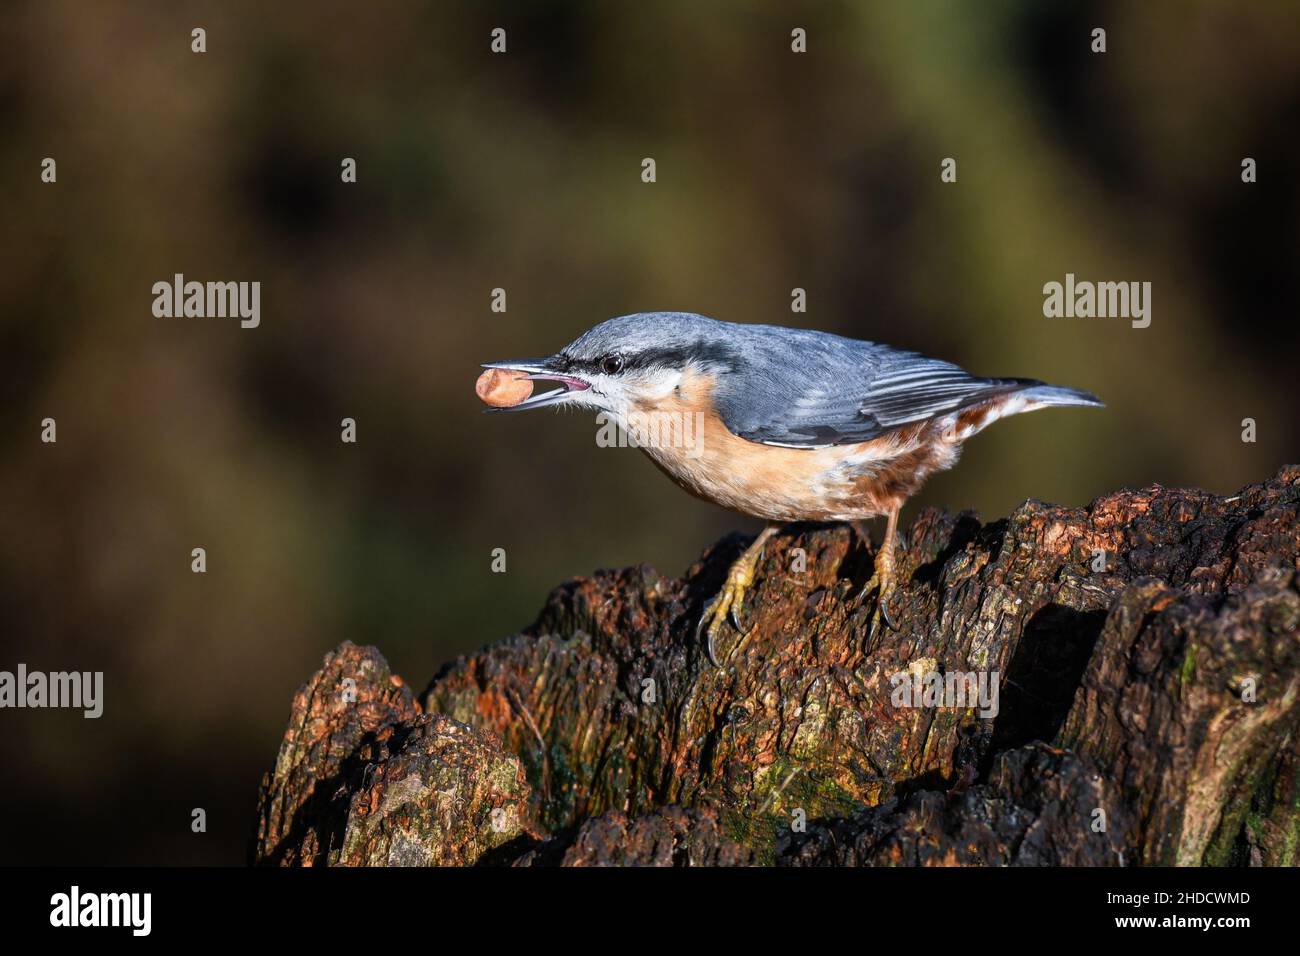 close up view of a nuthatch as it sits perched on a stump with a nut in its beak Stock Photo